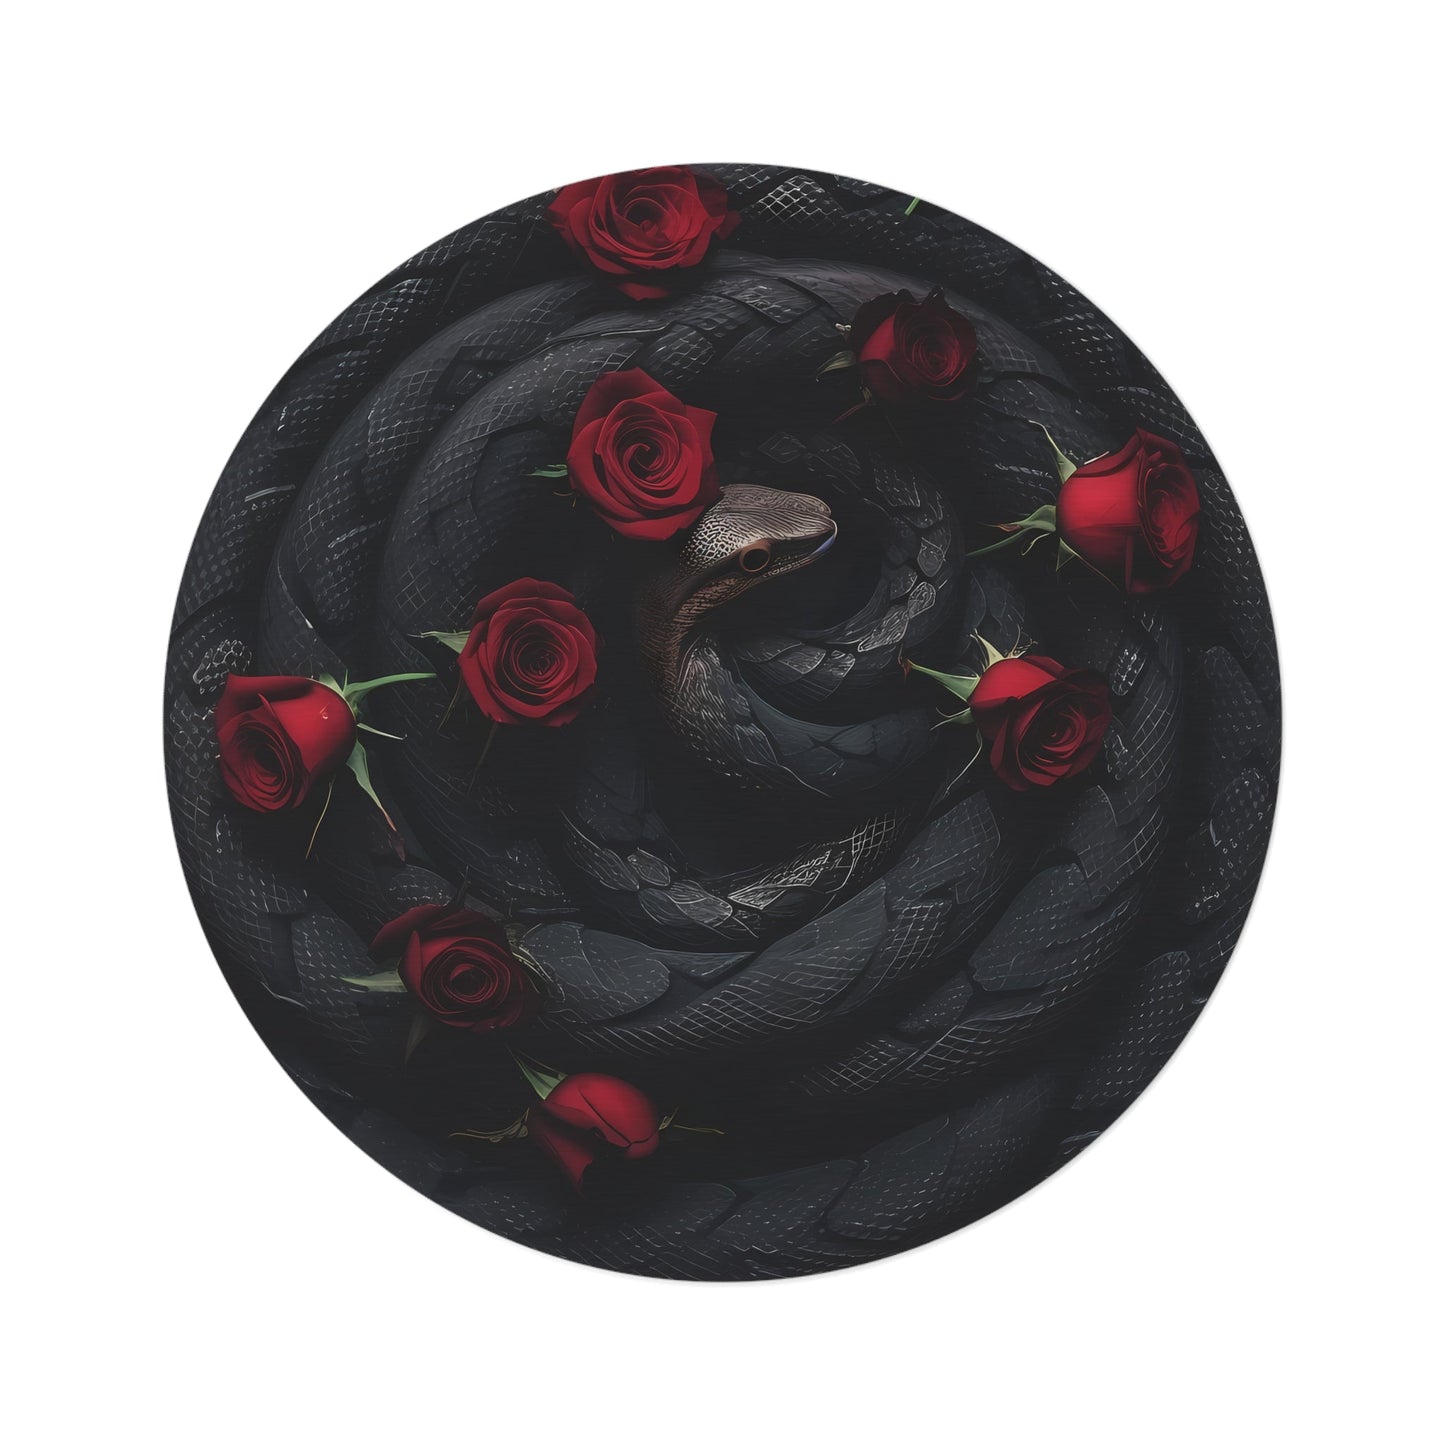 Black Coiled Snake and Red Roses Round Area RugHome DecorVTZdesigns60" × 60"academiaCarpetdark